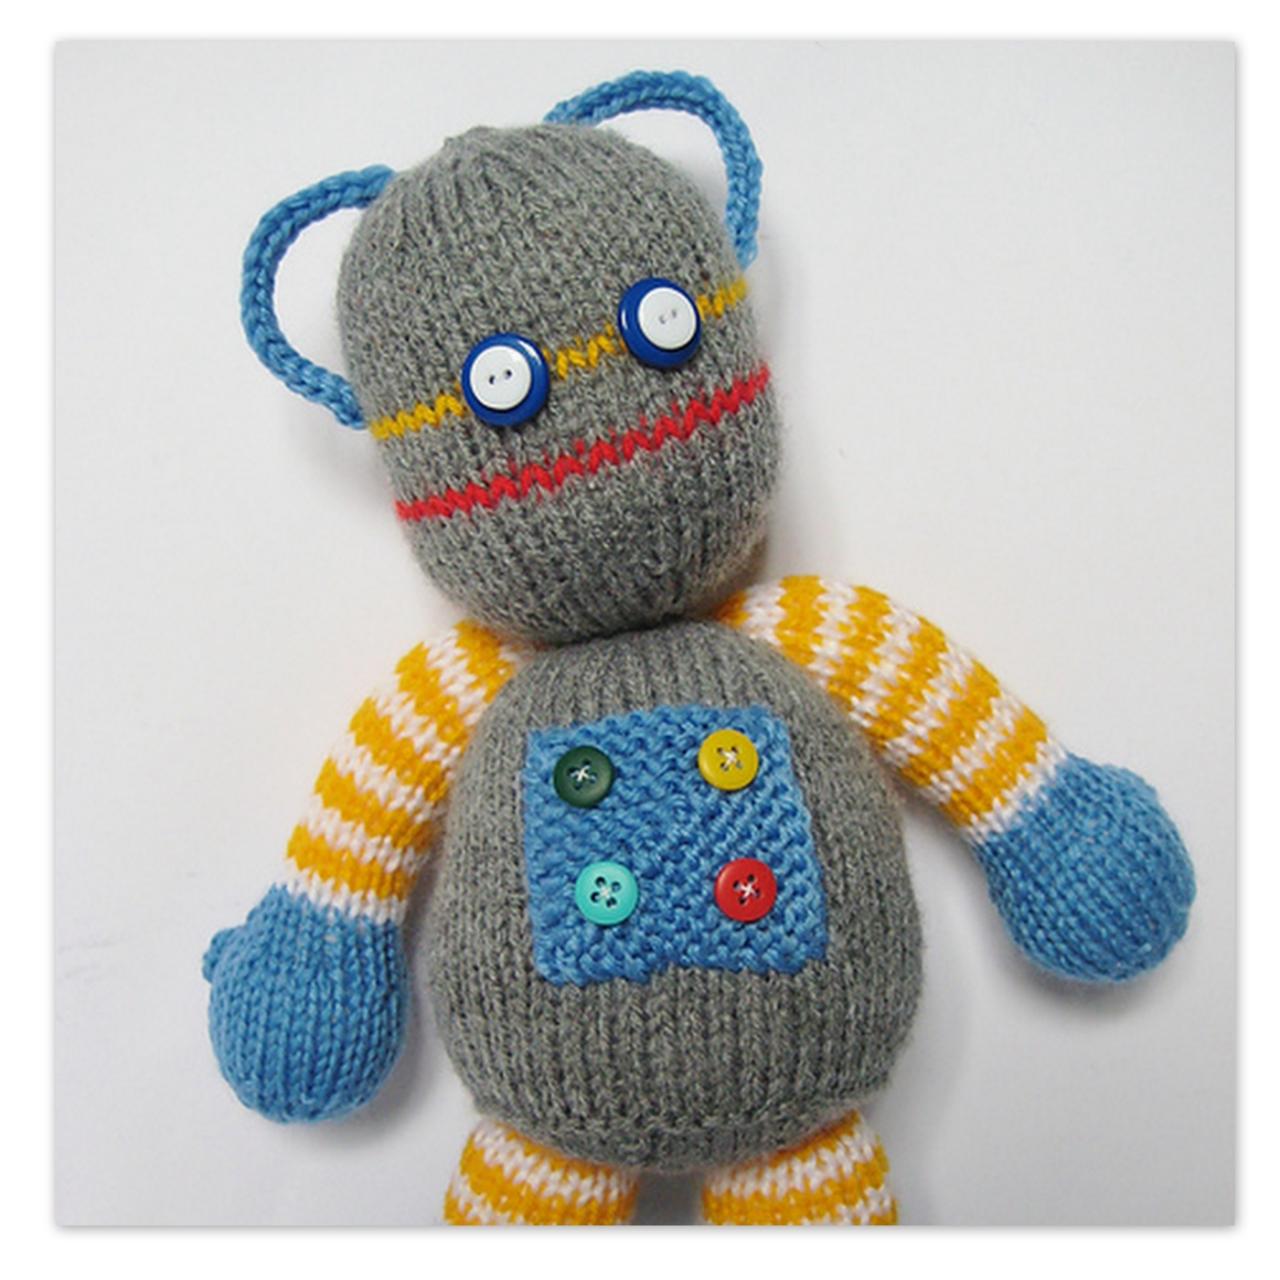 Beeper The Robot Toy Knitting Pattern